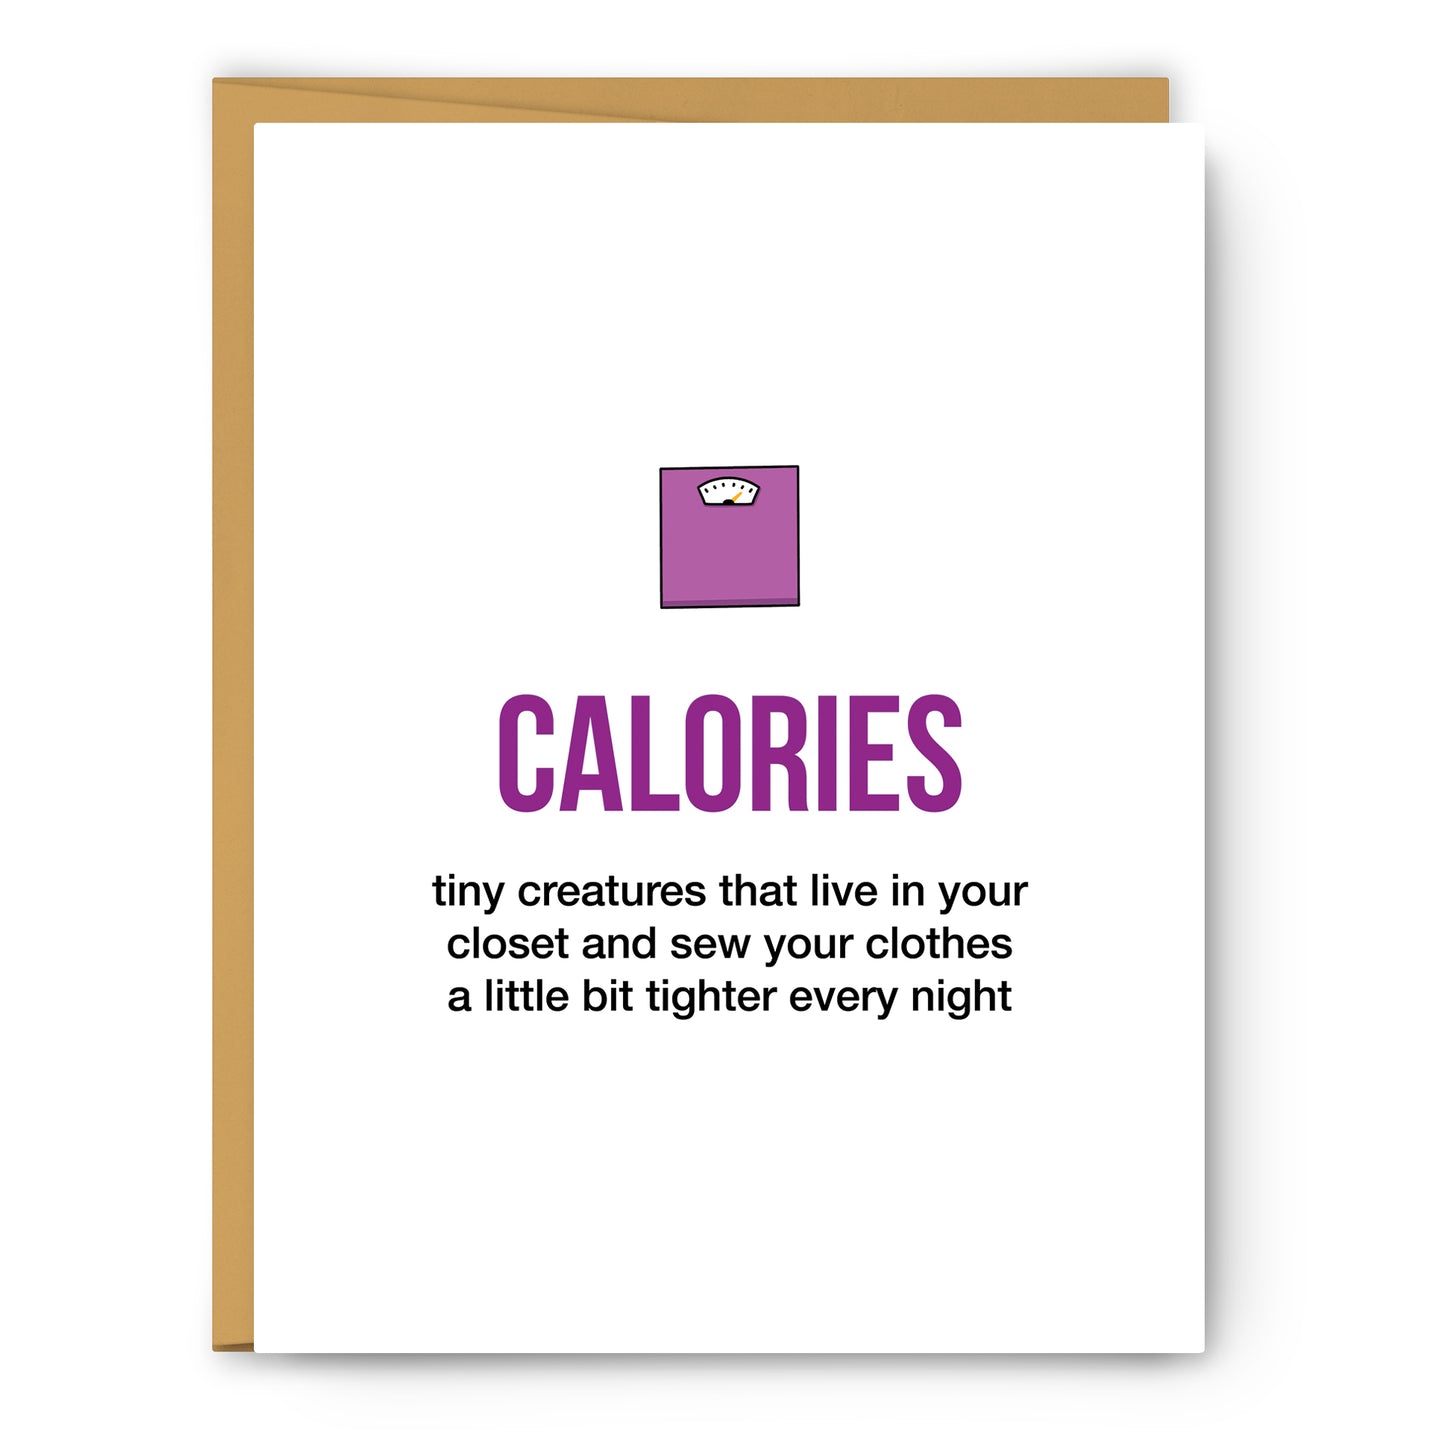 Calories  Definition Illustration Everyday Card